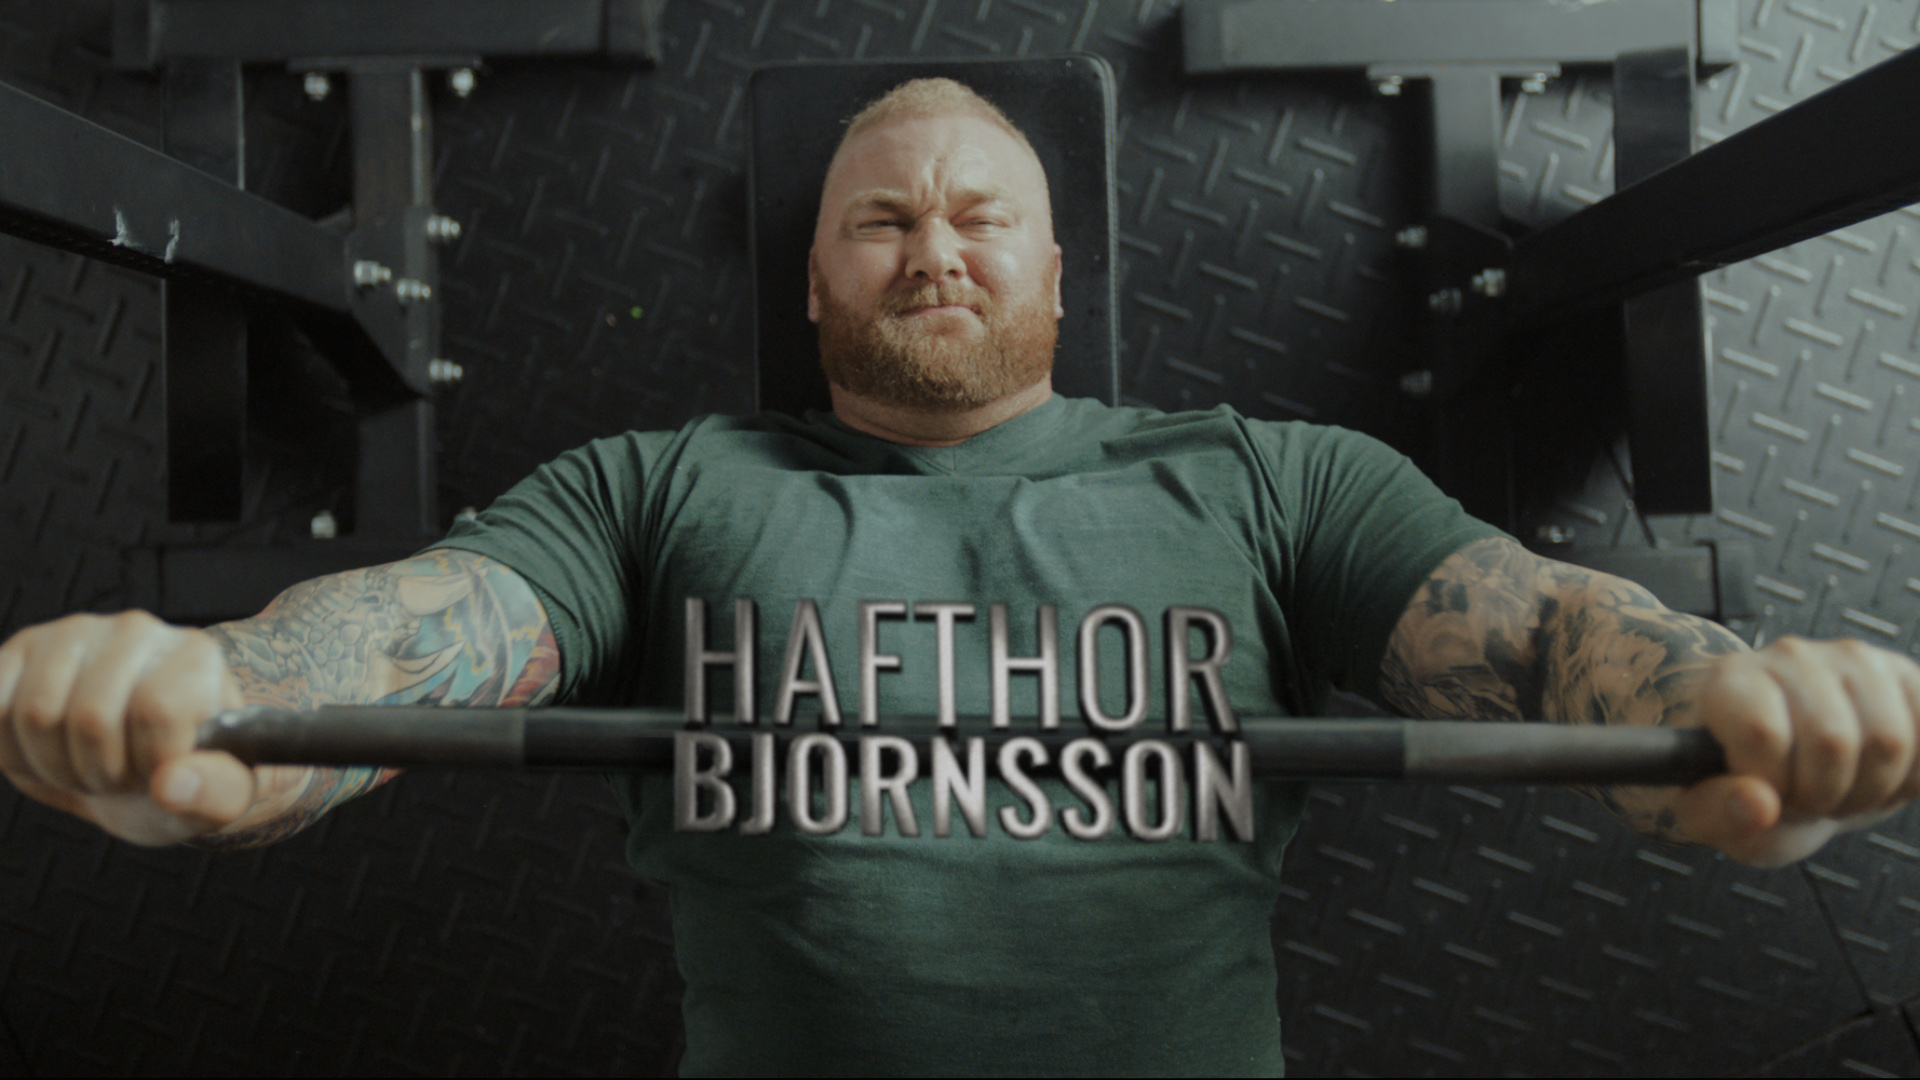 Krazy Glue® has challenged Hafthor Bjornsson, the World’s Strongest Man, to put the product’s strength and durability to the test in a krazy weight lifting challenge that will take place live on December 5, 2018, in New York City.